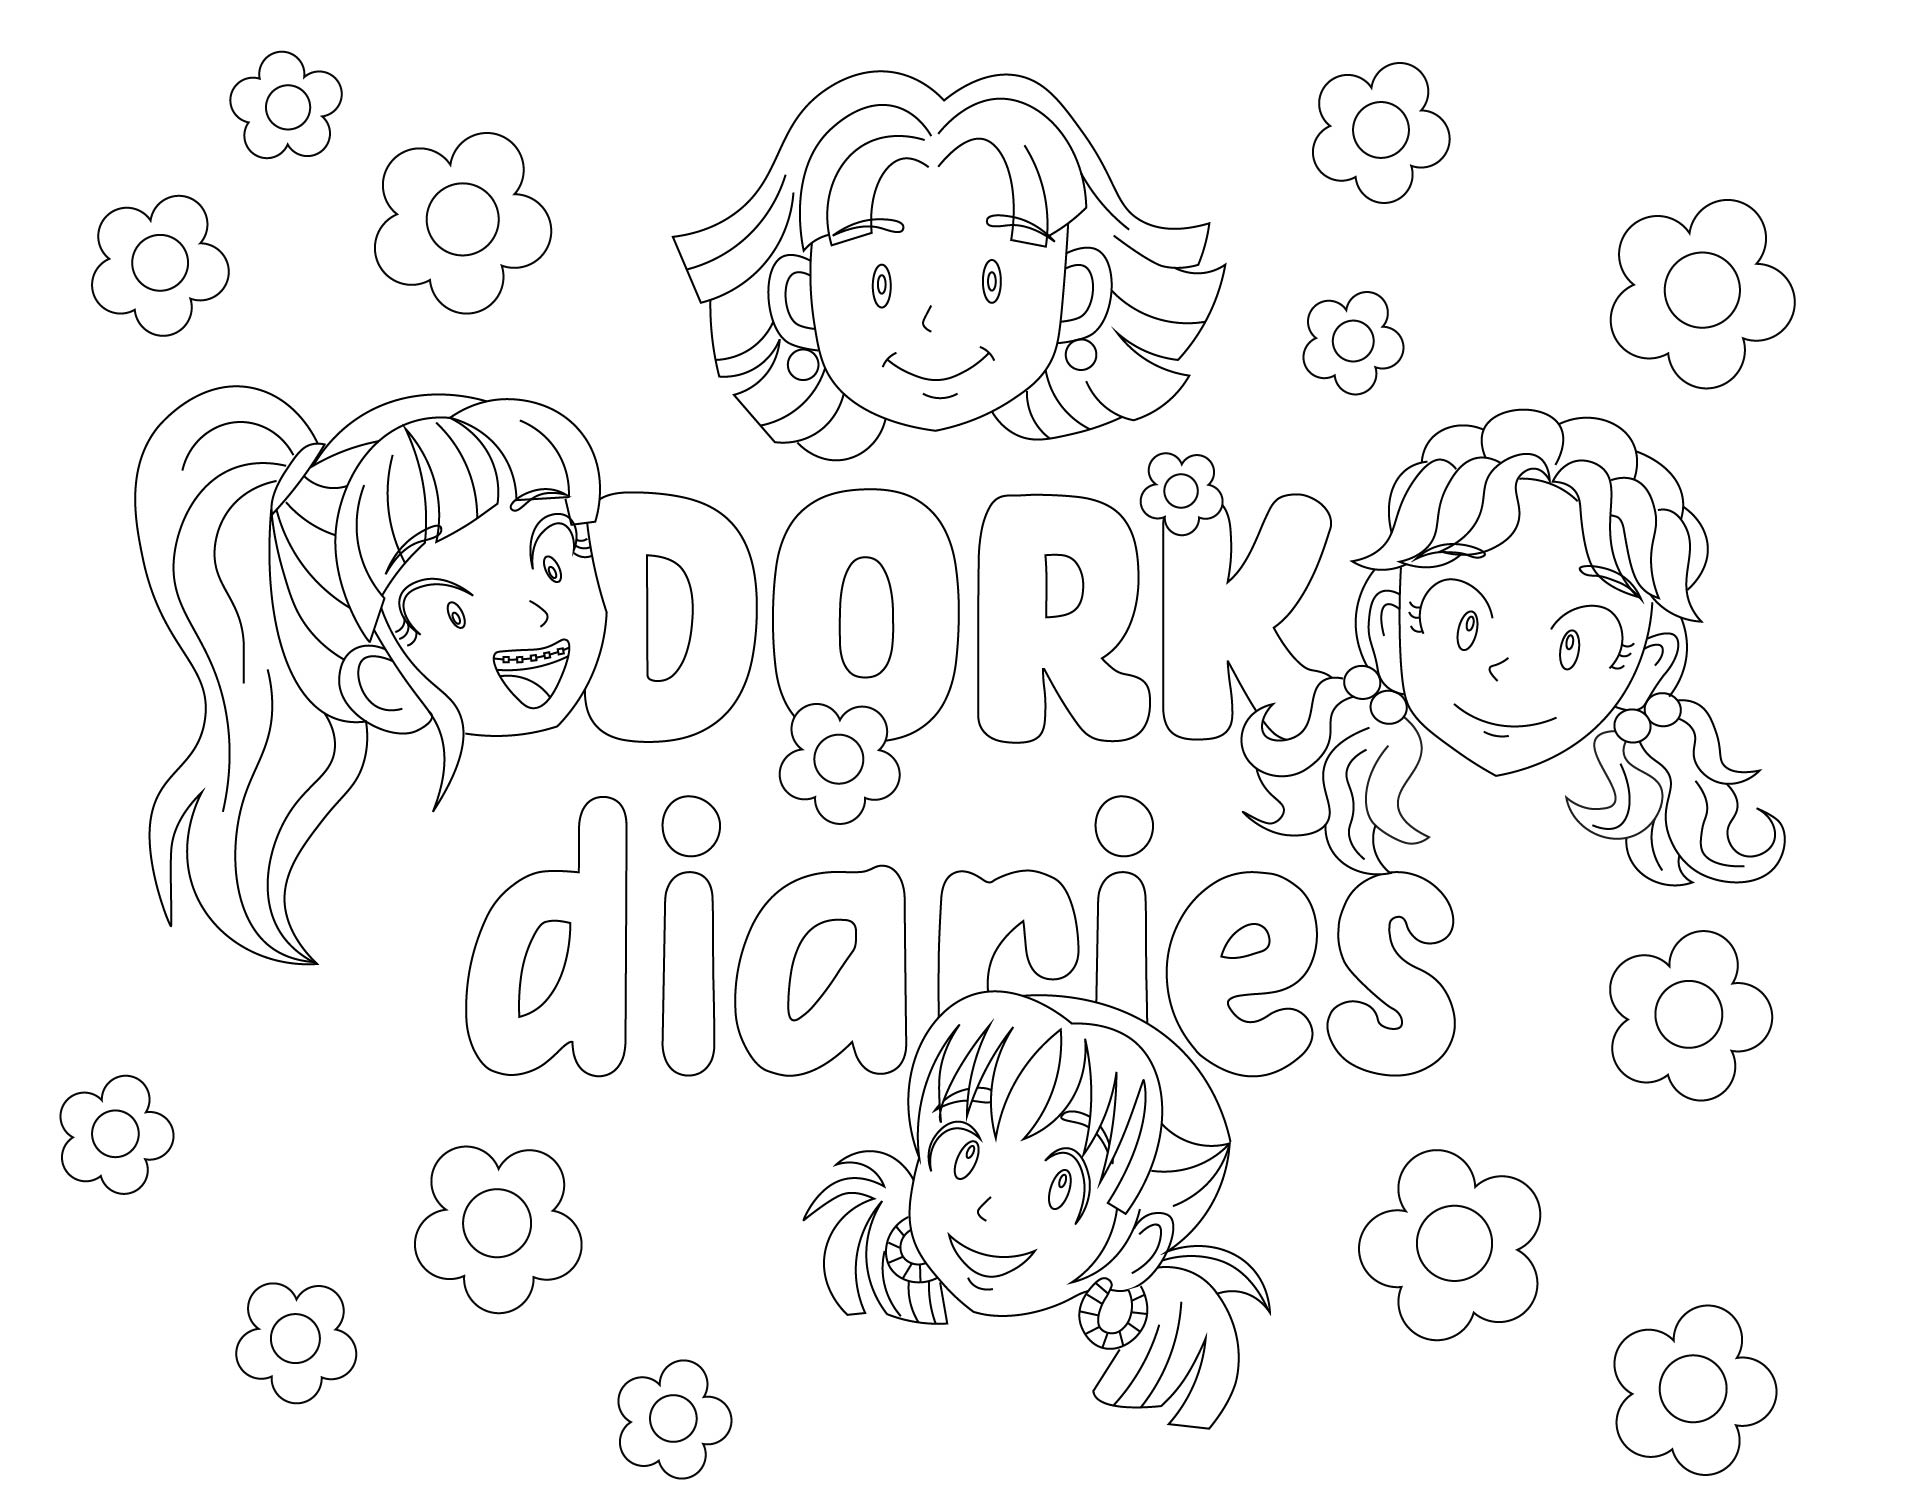 Dork Diaries Characters Coloring Pages